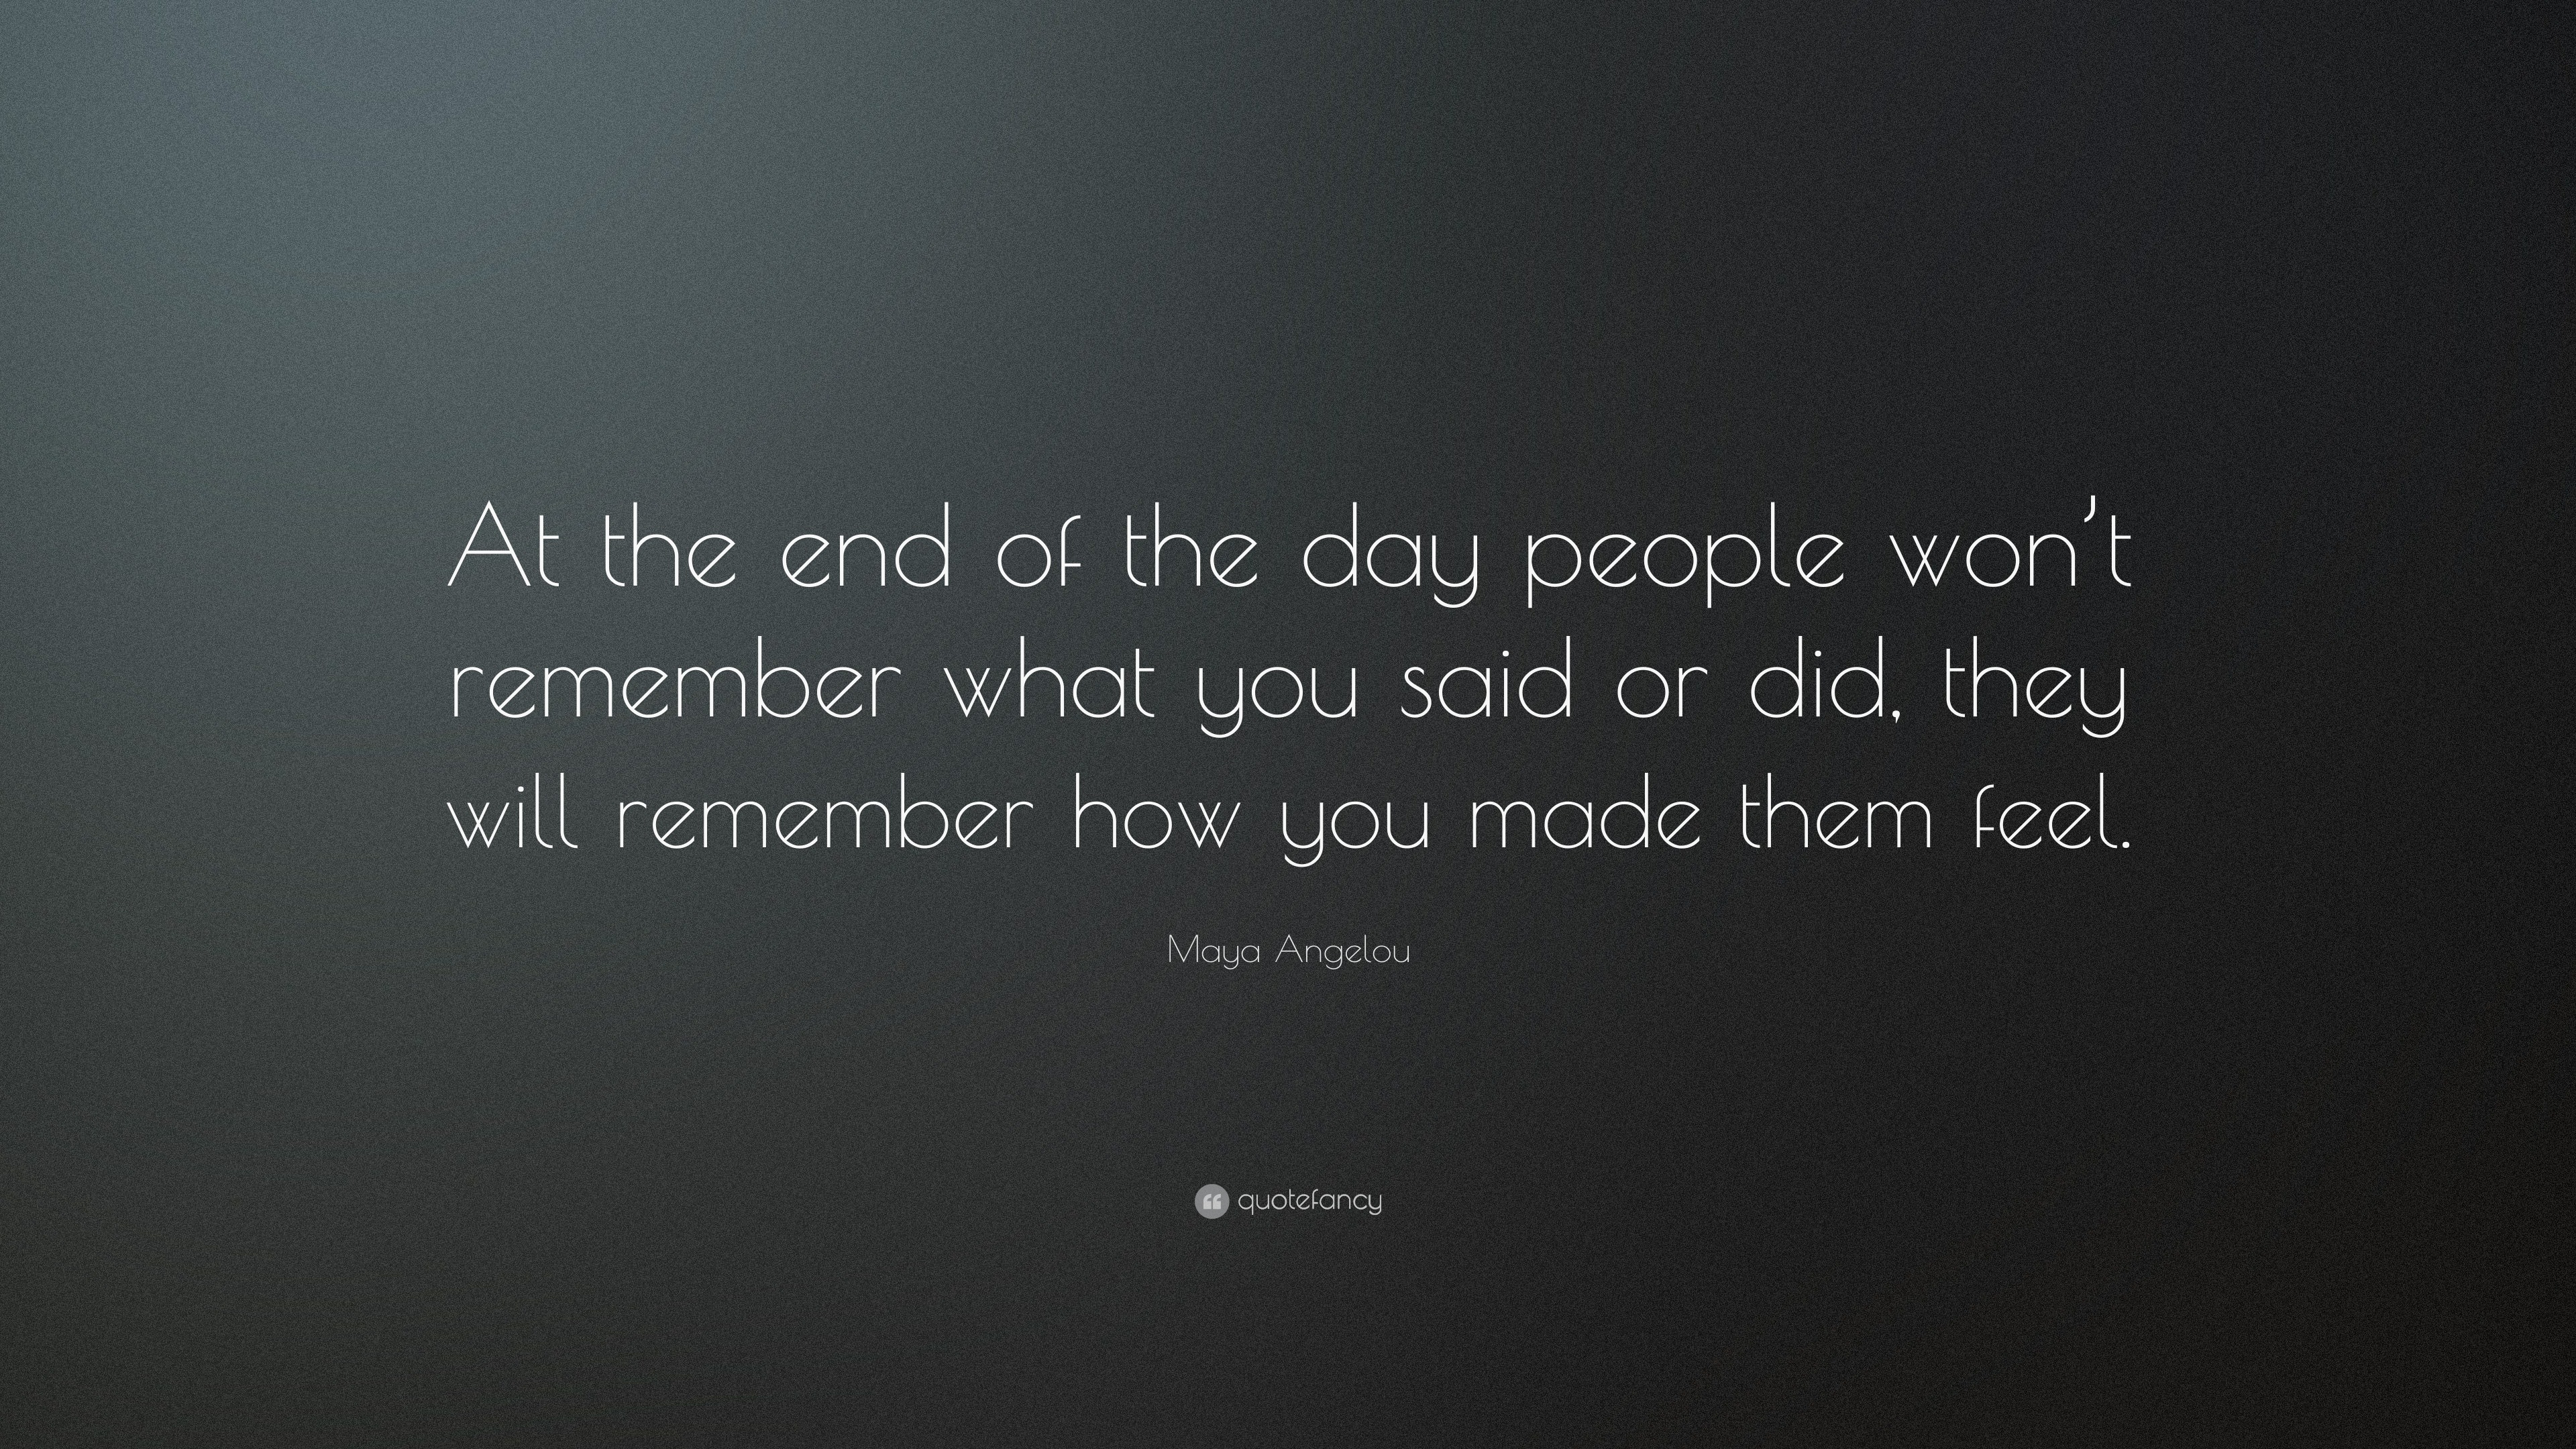 Maya Angelou Quote: “At the end of the day people won’t remember what ...